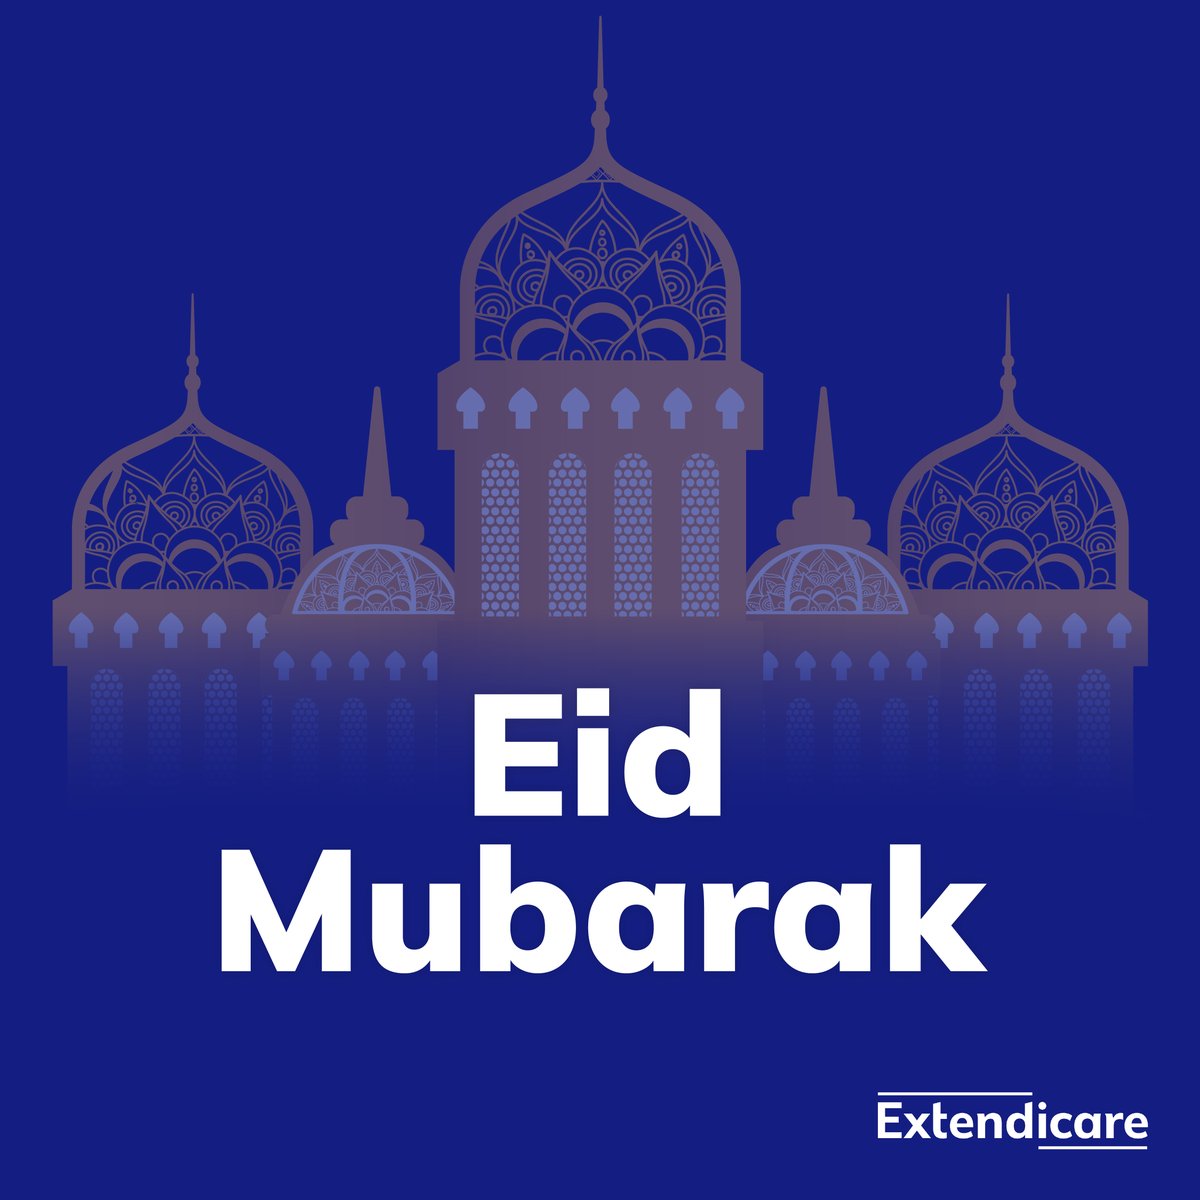 May you and your loved ones have a joyful celebration and a blessed Eid. Eid Mubarak!